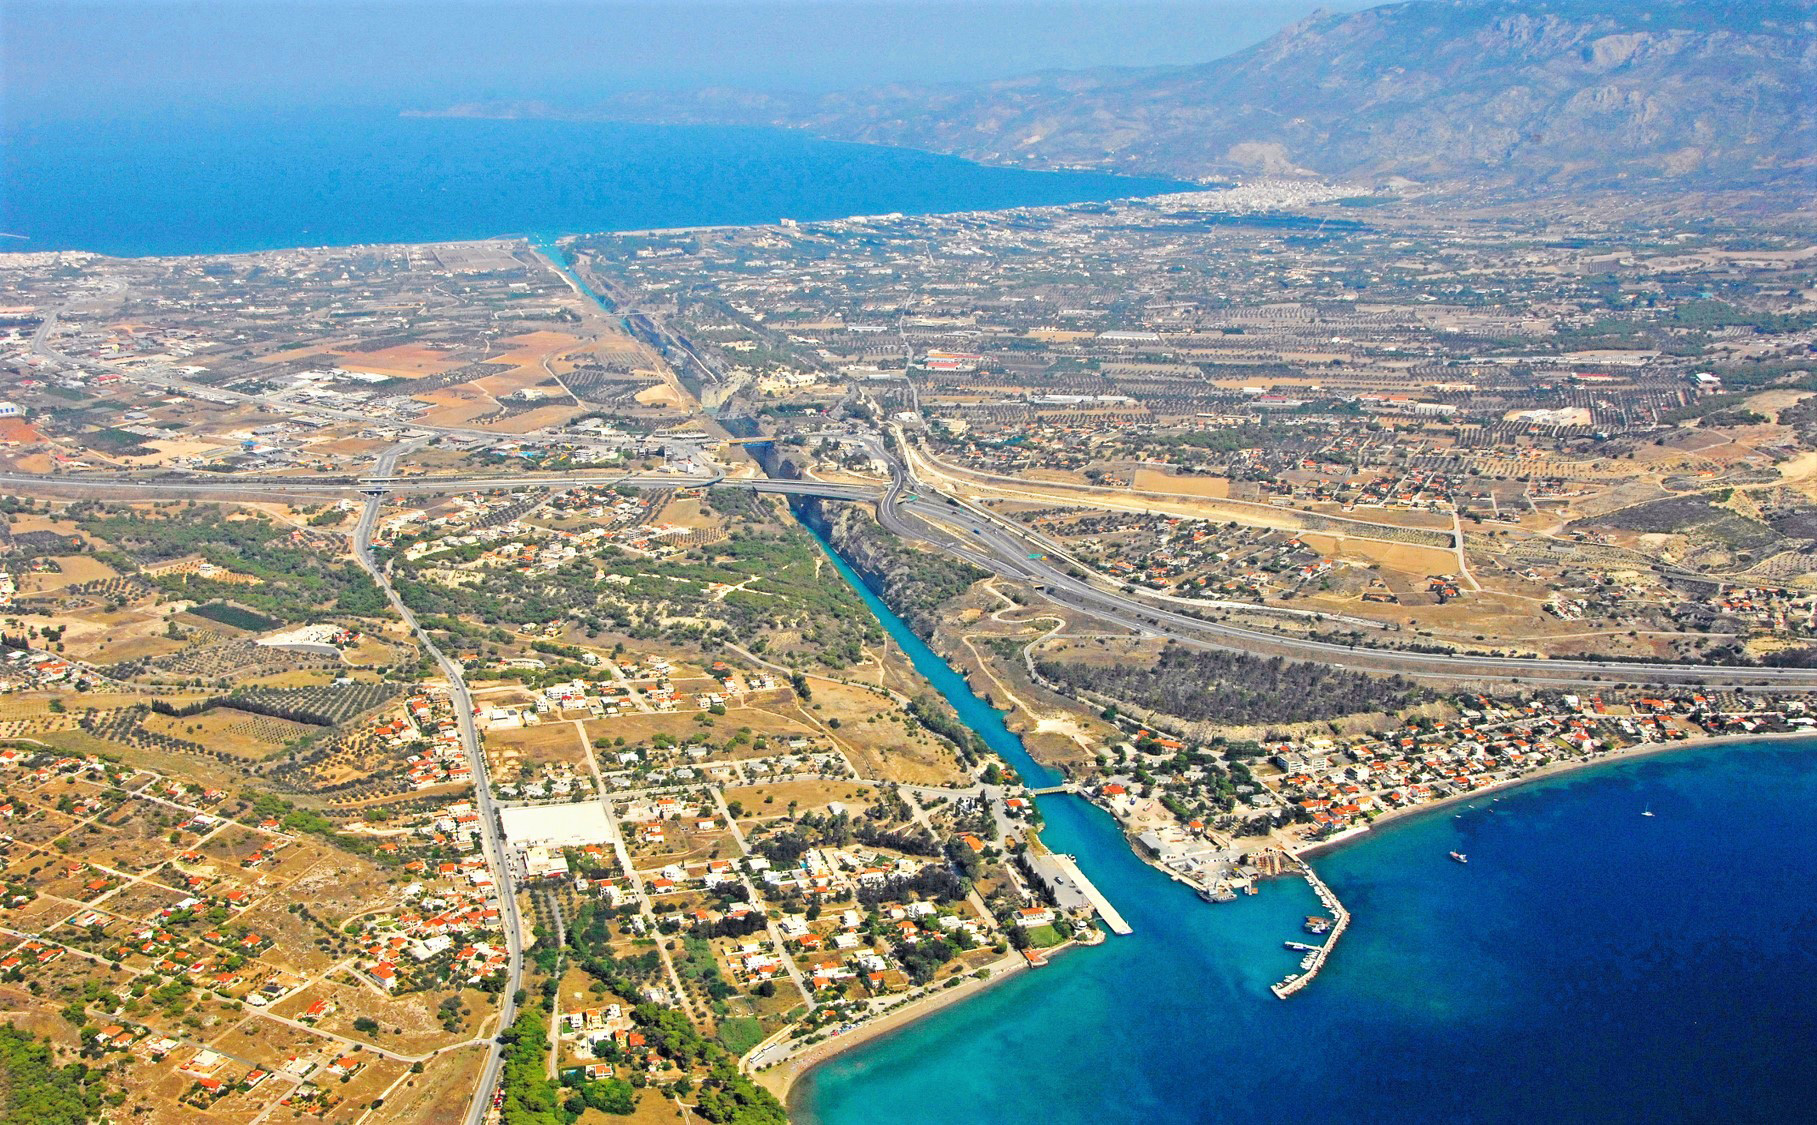 Explore Corinth in Peloponnese with My Greece Tours services